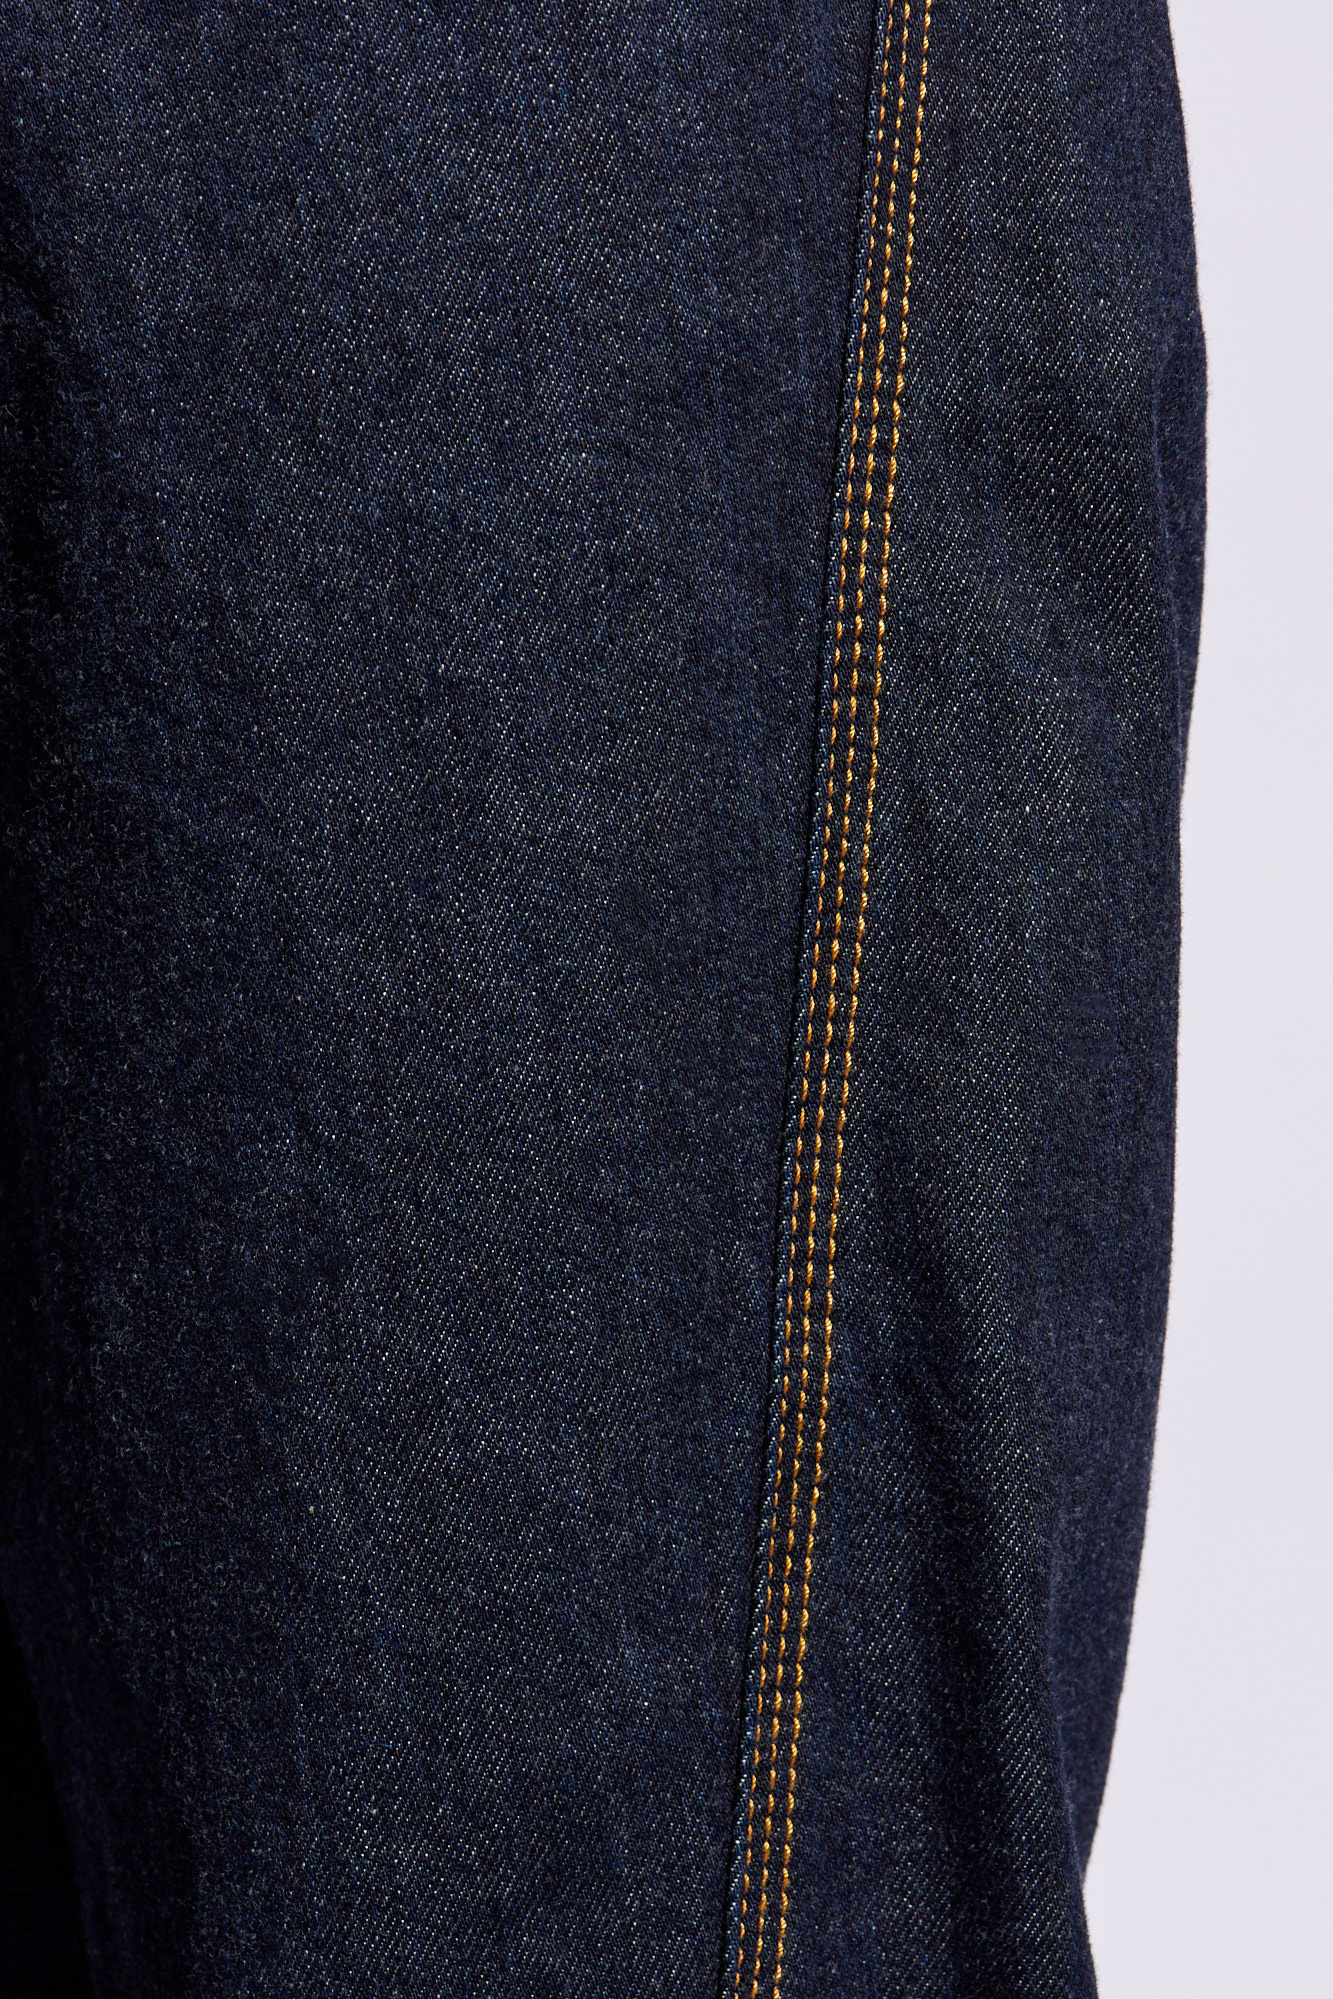 Lanvin Jeans with twisted seams